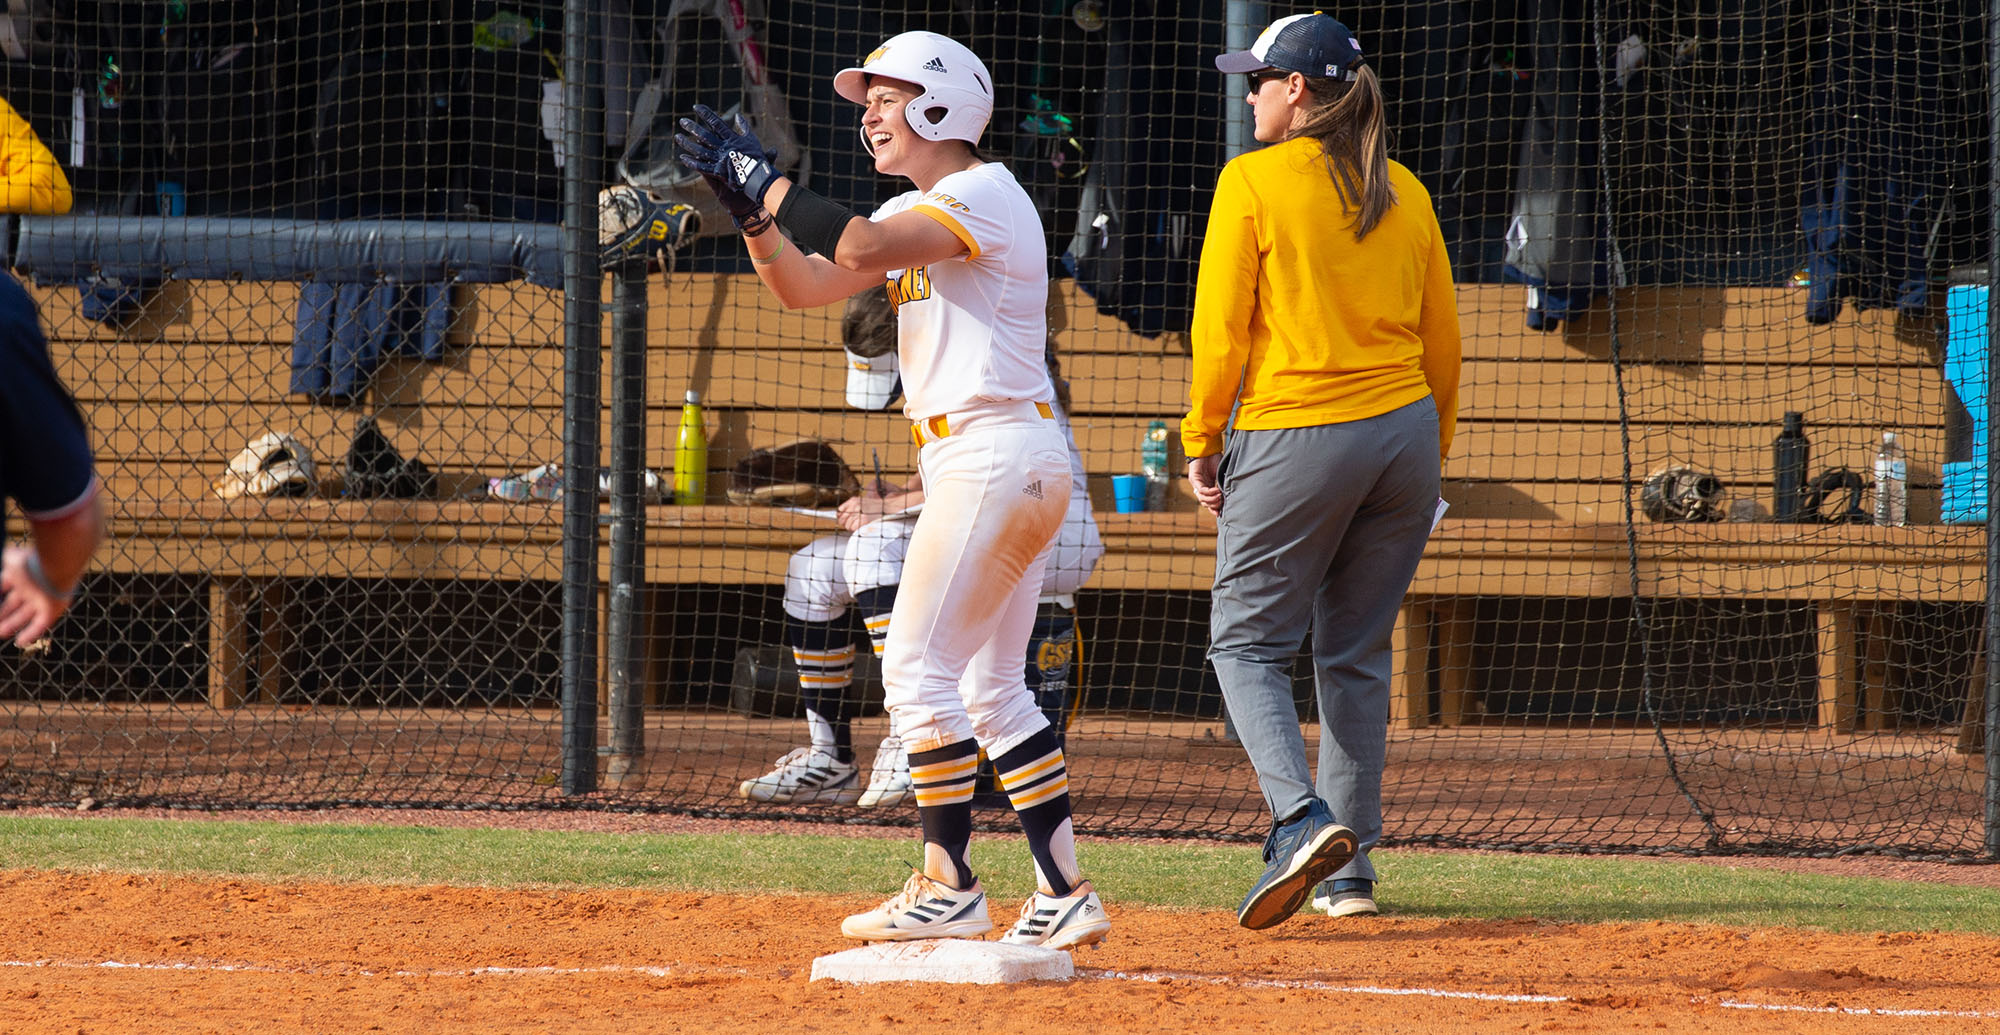 Lady Canes Shutout Bobcats in Series Sweep